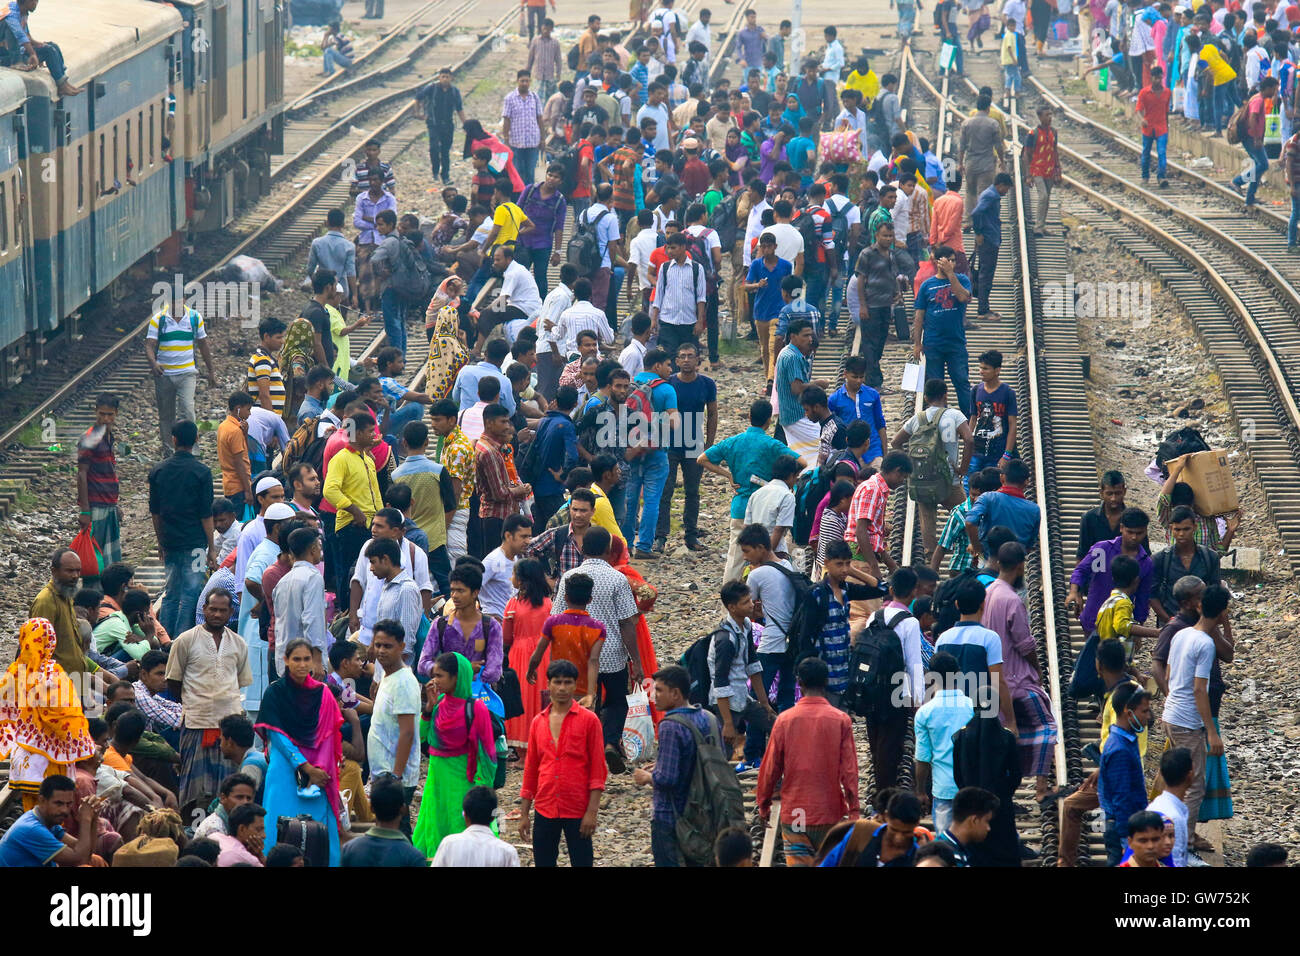 Dhaka, Bangladesh. 12 September, 2016: People wait at the Airport Railway station for a train to reach village home to spend Eid-ul-Azha holidays. Stock Photo